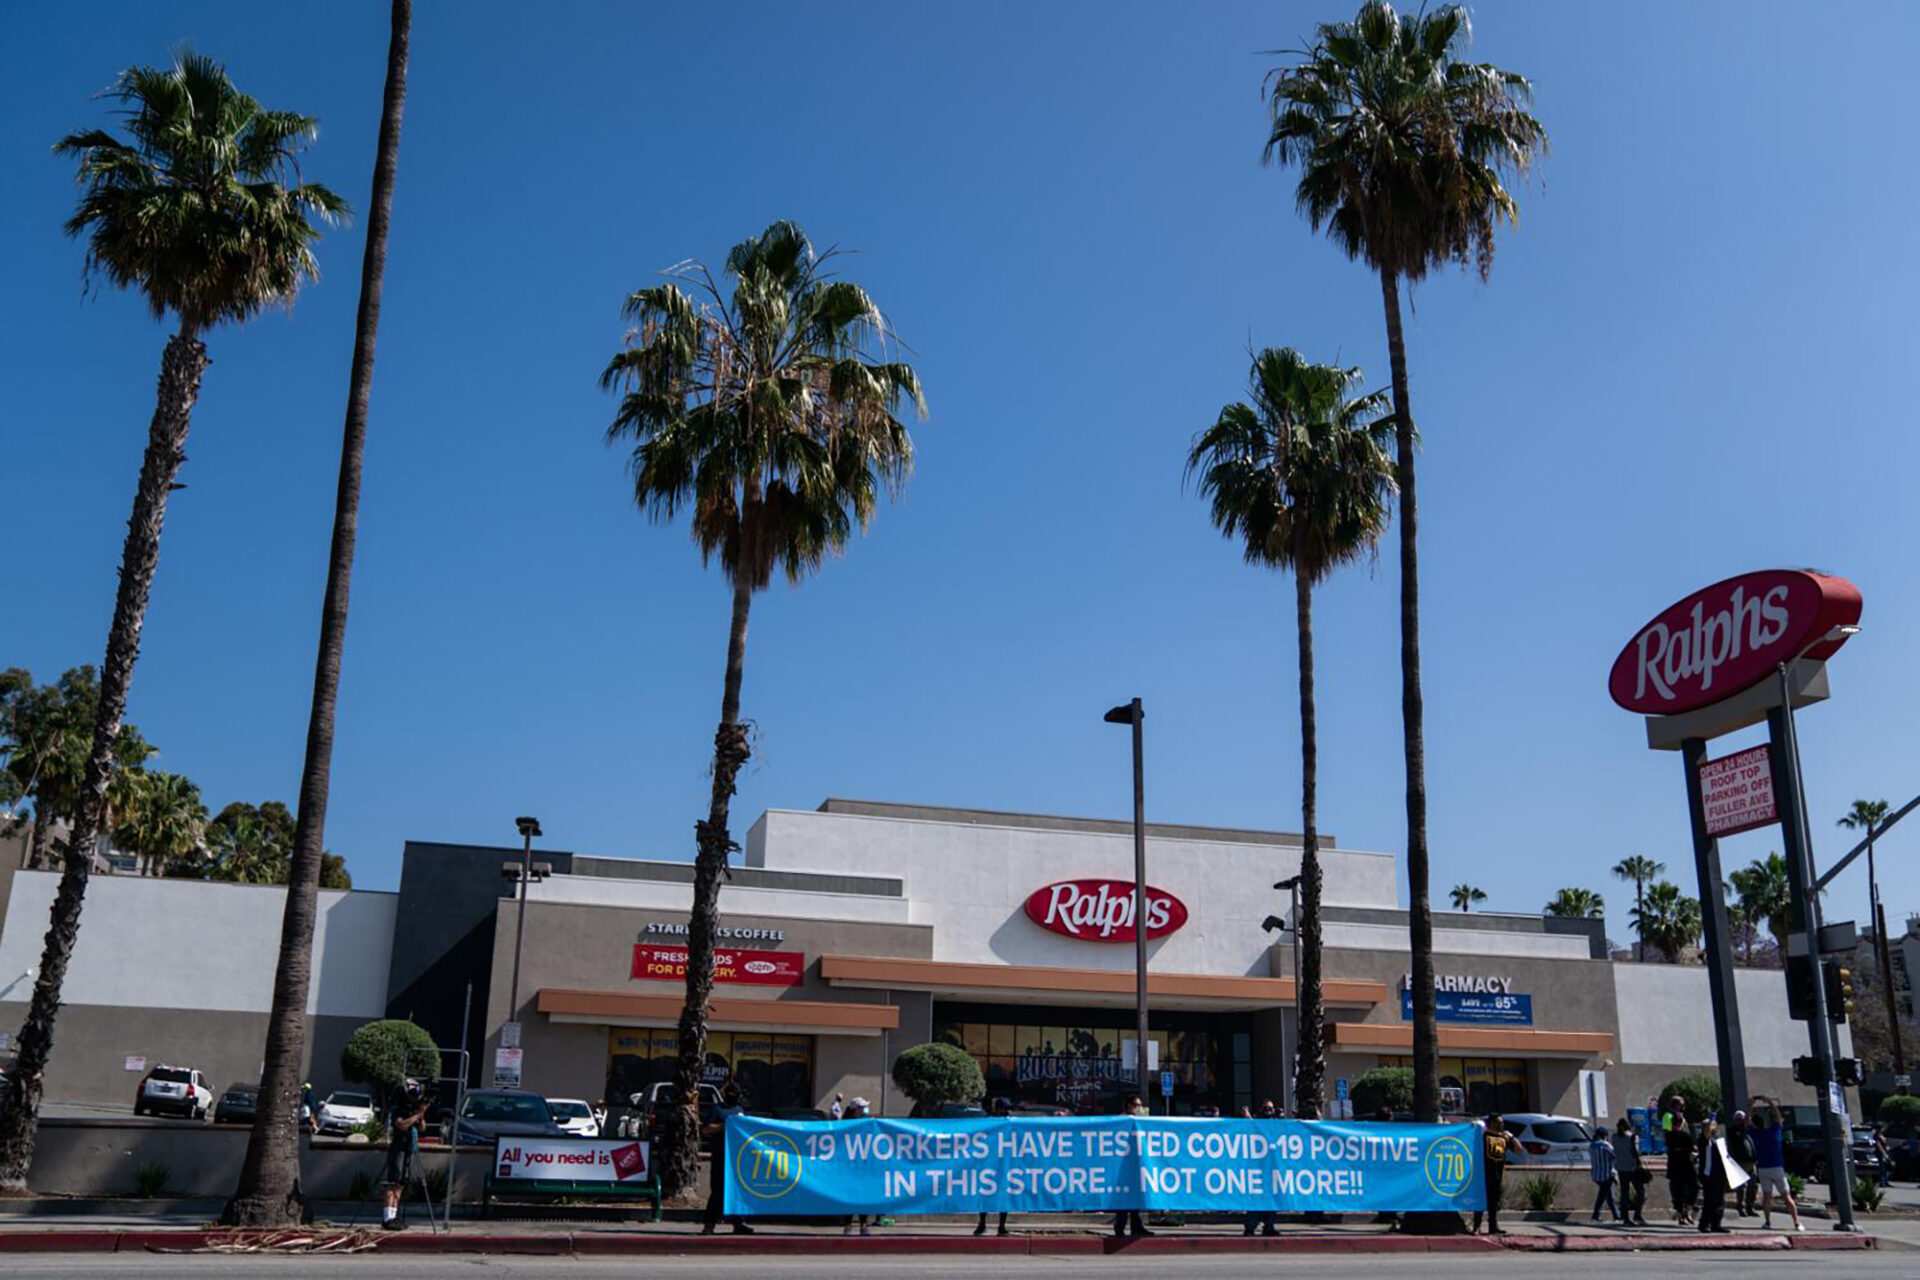 Ralphs illegally denied jobs to formerly incarcerated people, civil rights lawsuit alleges